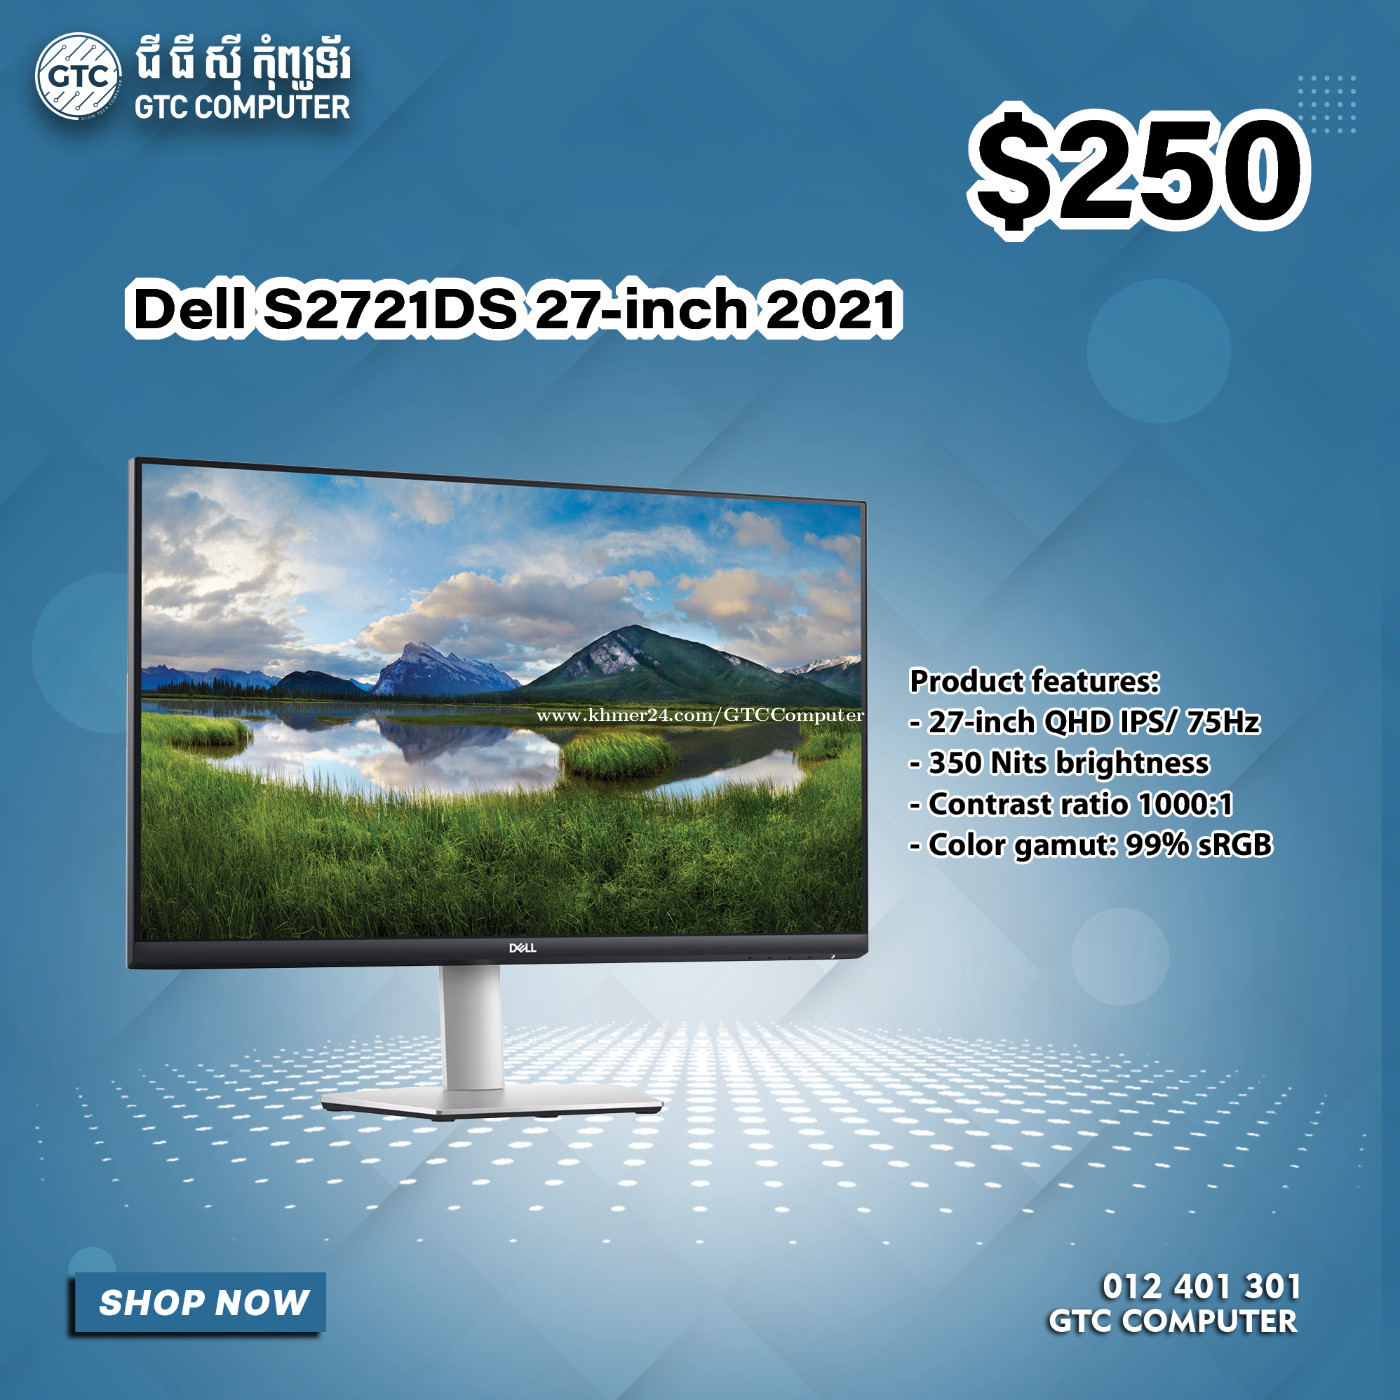 Dell S2721DS 27-inch 2021 price $250.00 in Veal Vong, Prampir